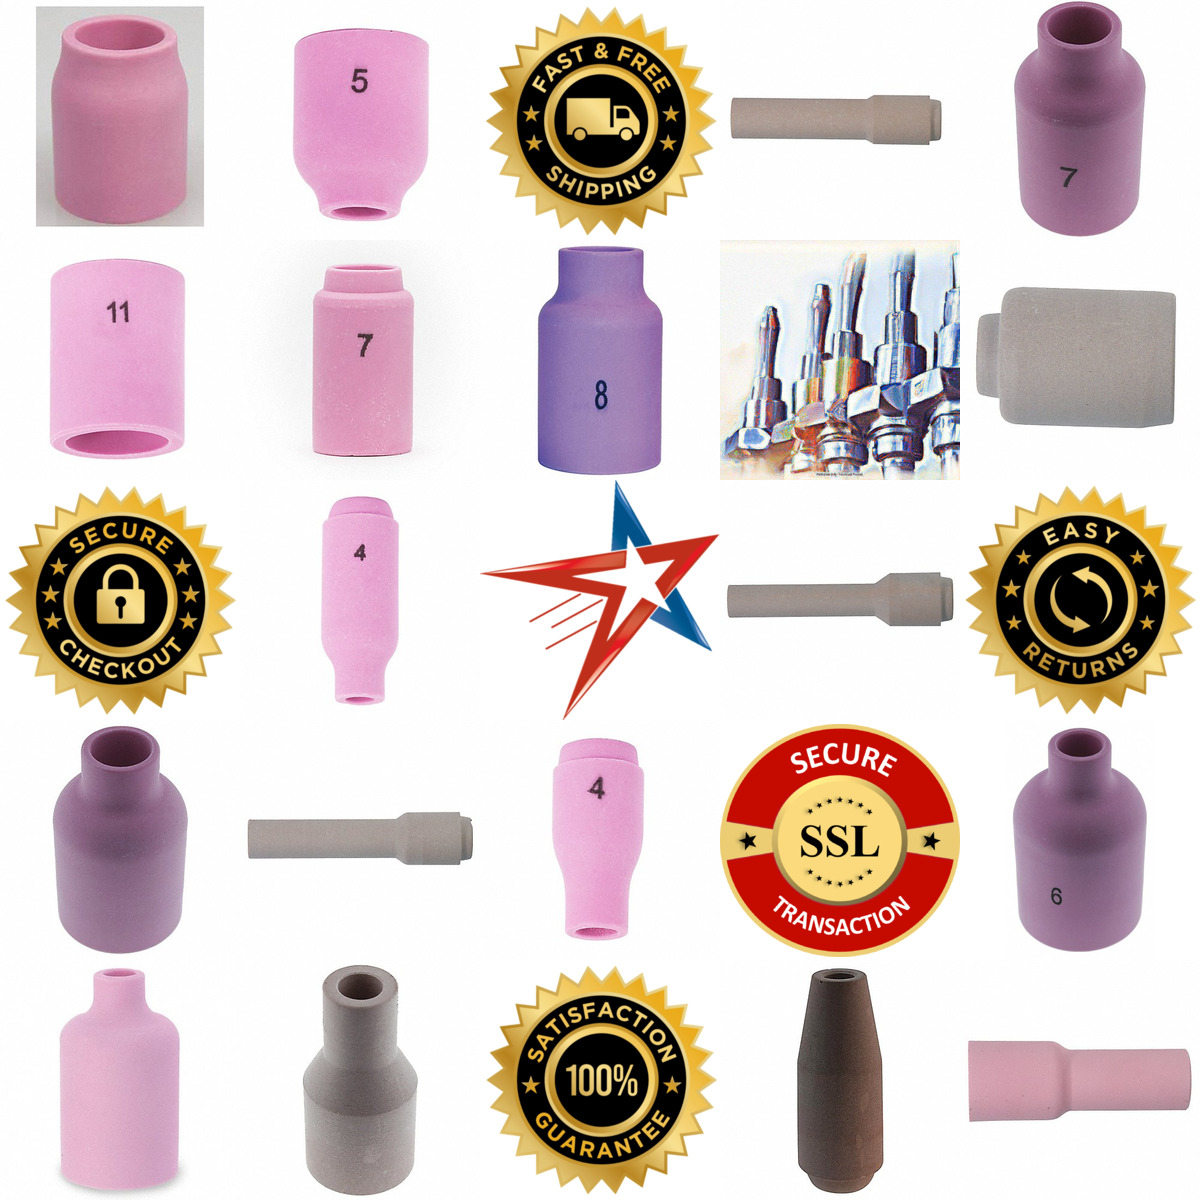 A selection of Tig Cups and Nozzles products on GoVets